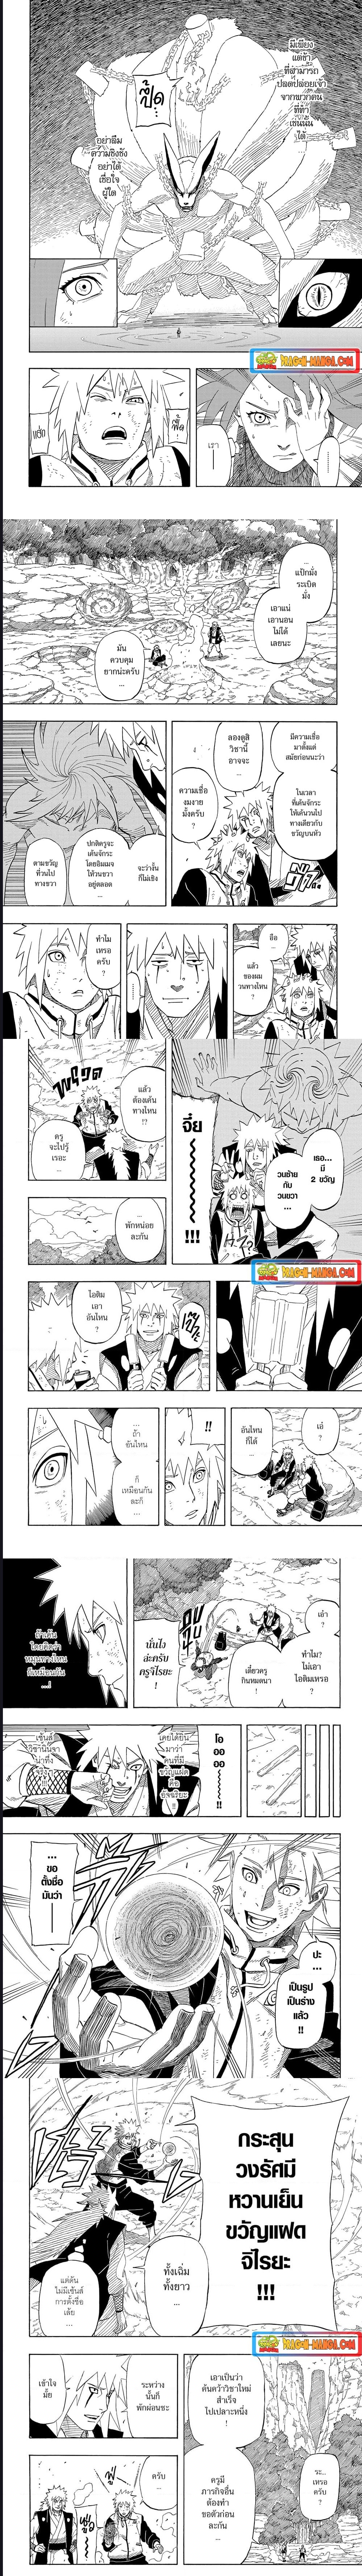 Naruto The Whorl within the Spiral ตอนที่ 1 (6)